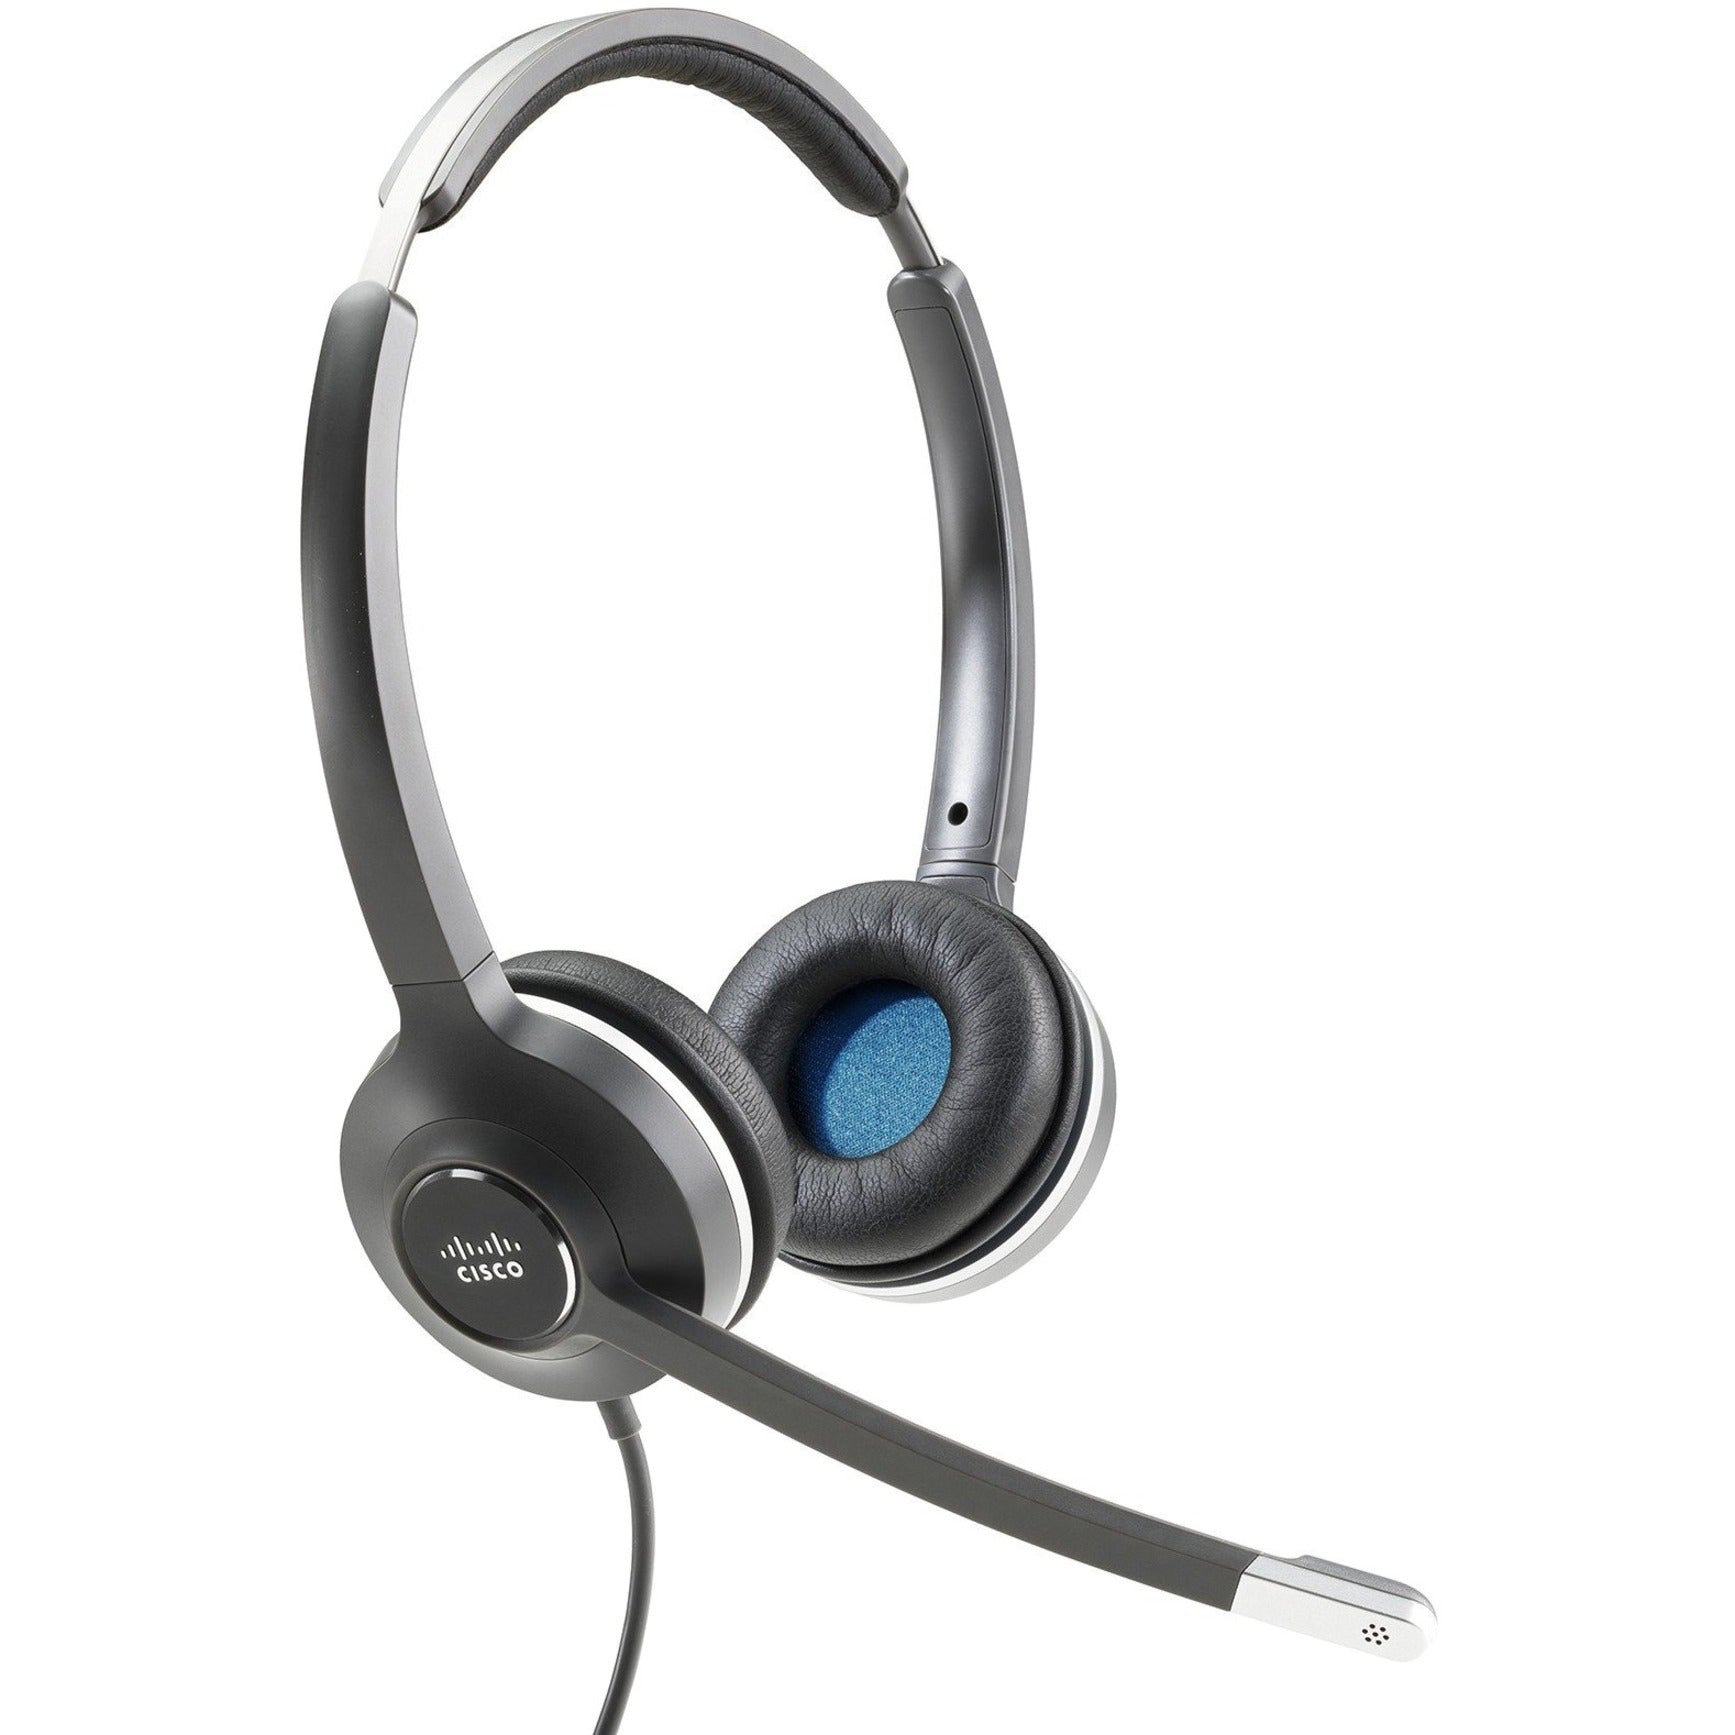 Cisco CP-HS-WL-562-M-US= 562 Headset, Wireless Bluetooth Stereo Over-the-head Headset